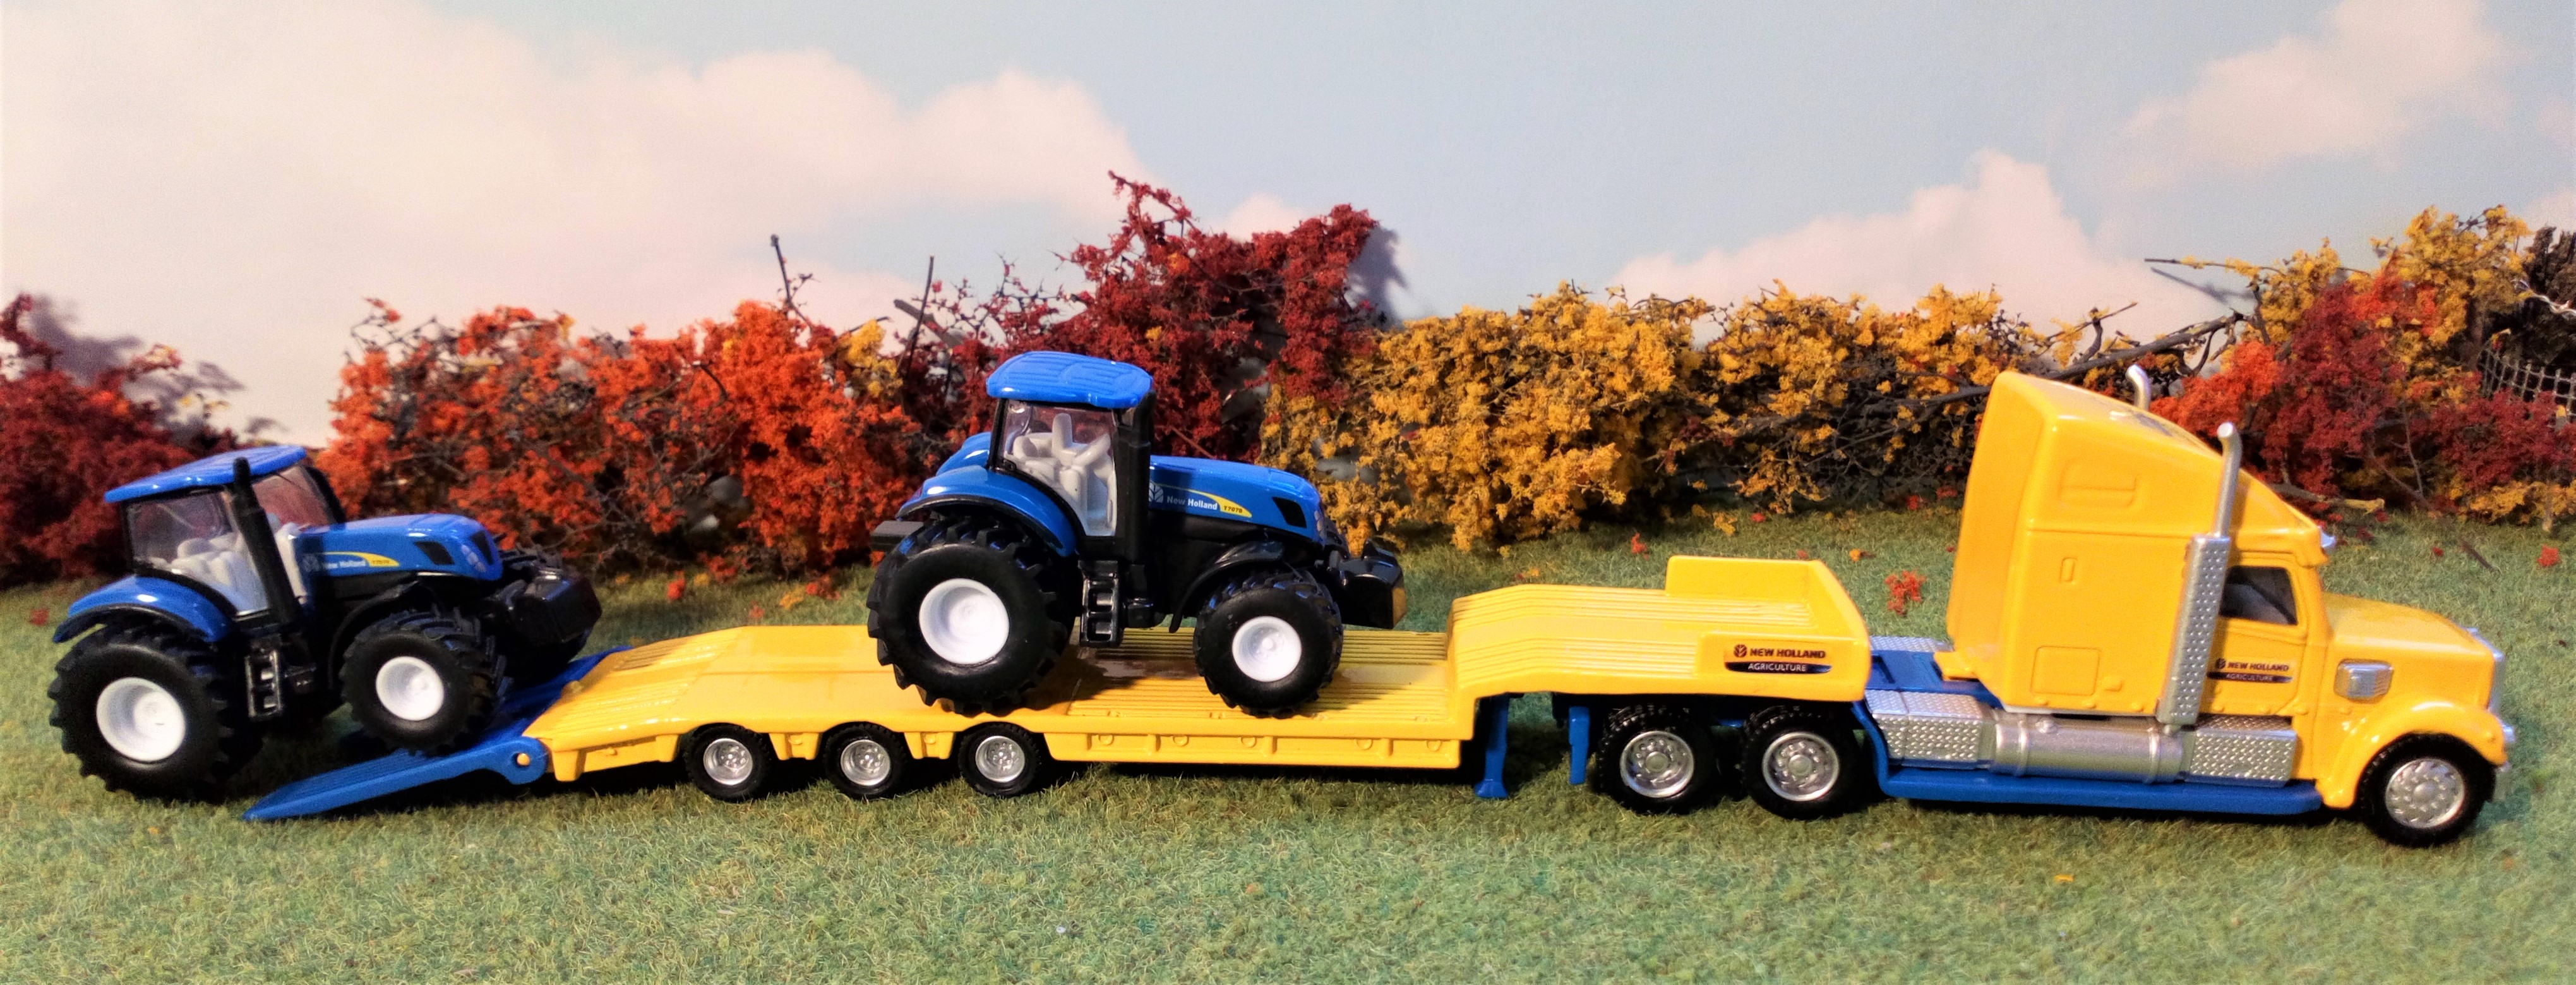 Siku 1805 Freightliner Truck with New Holland 7070 Tractors Scale 1:87 Diecast 